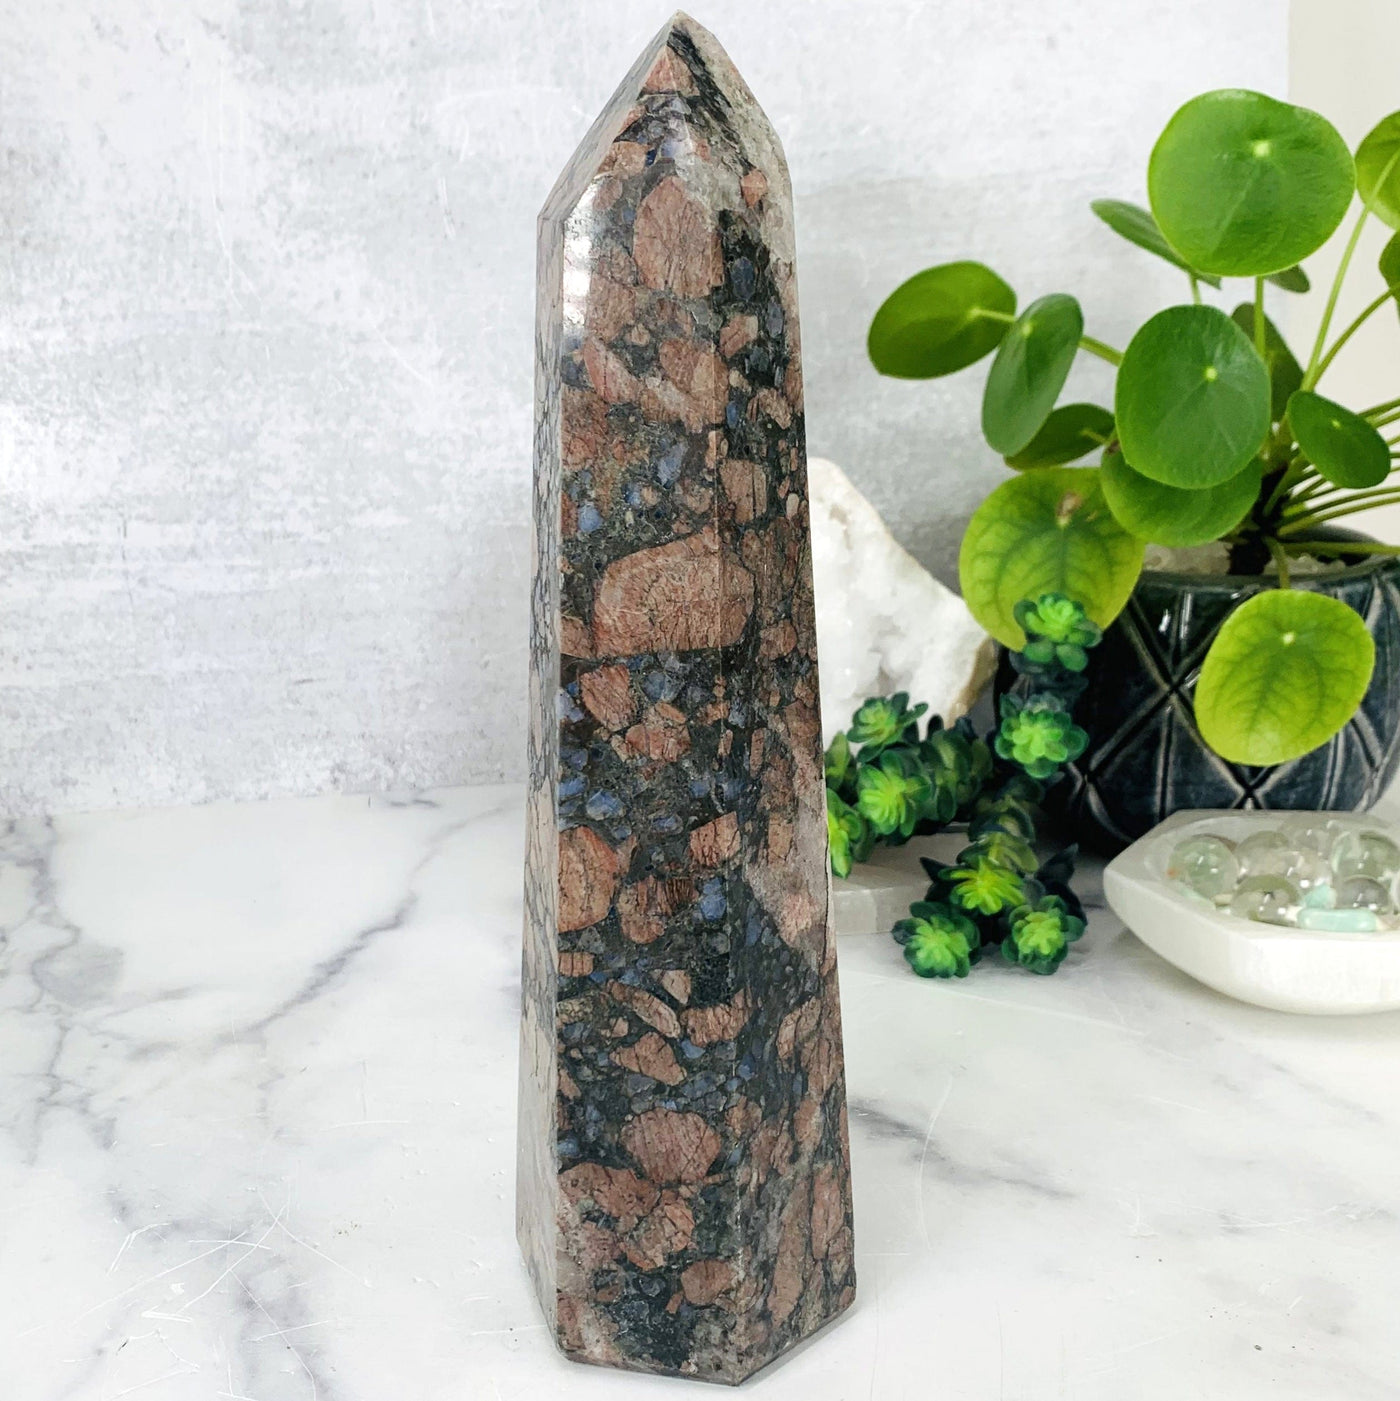 Side shot of Rhyolite Polished Tower, the Rhyolite tower is being displayed on a marbled background, next to a green natural plant.